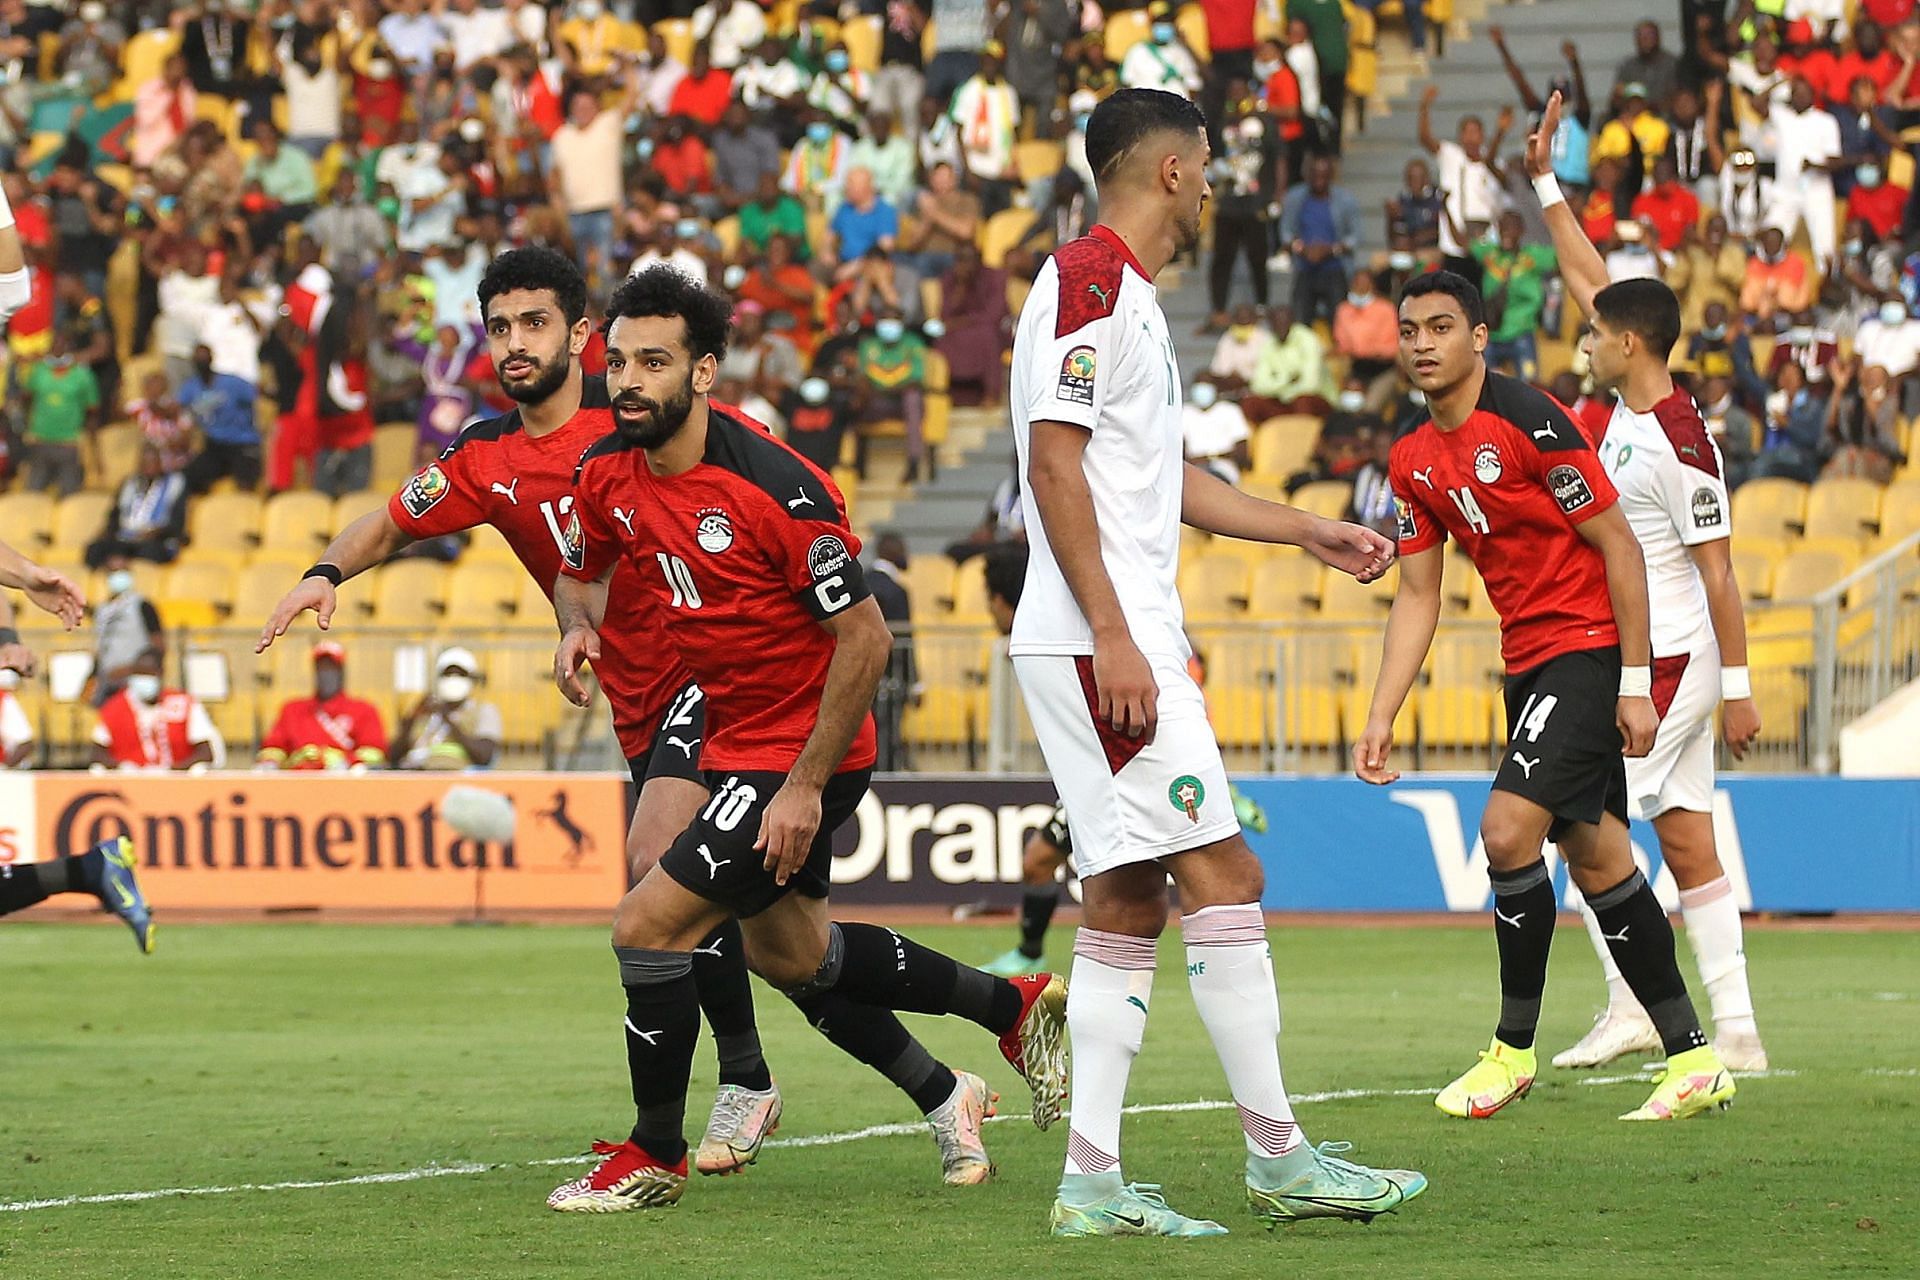 Egypt booked their semi-final spot after beating Morocco